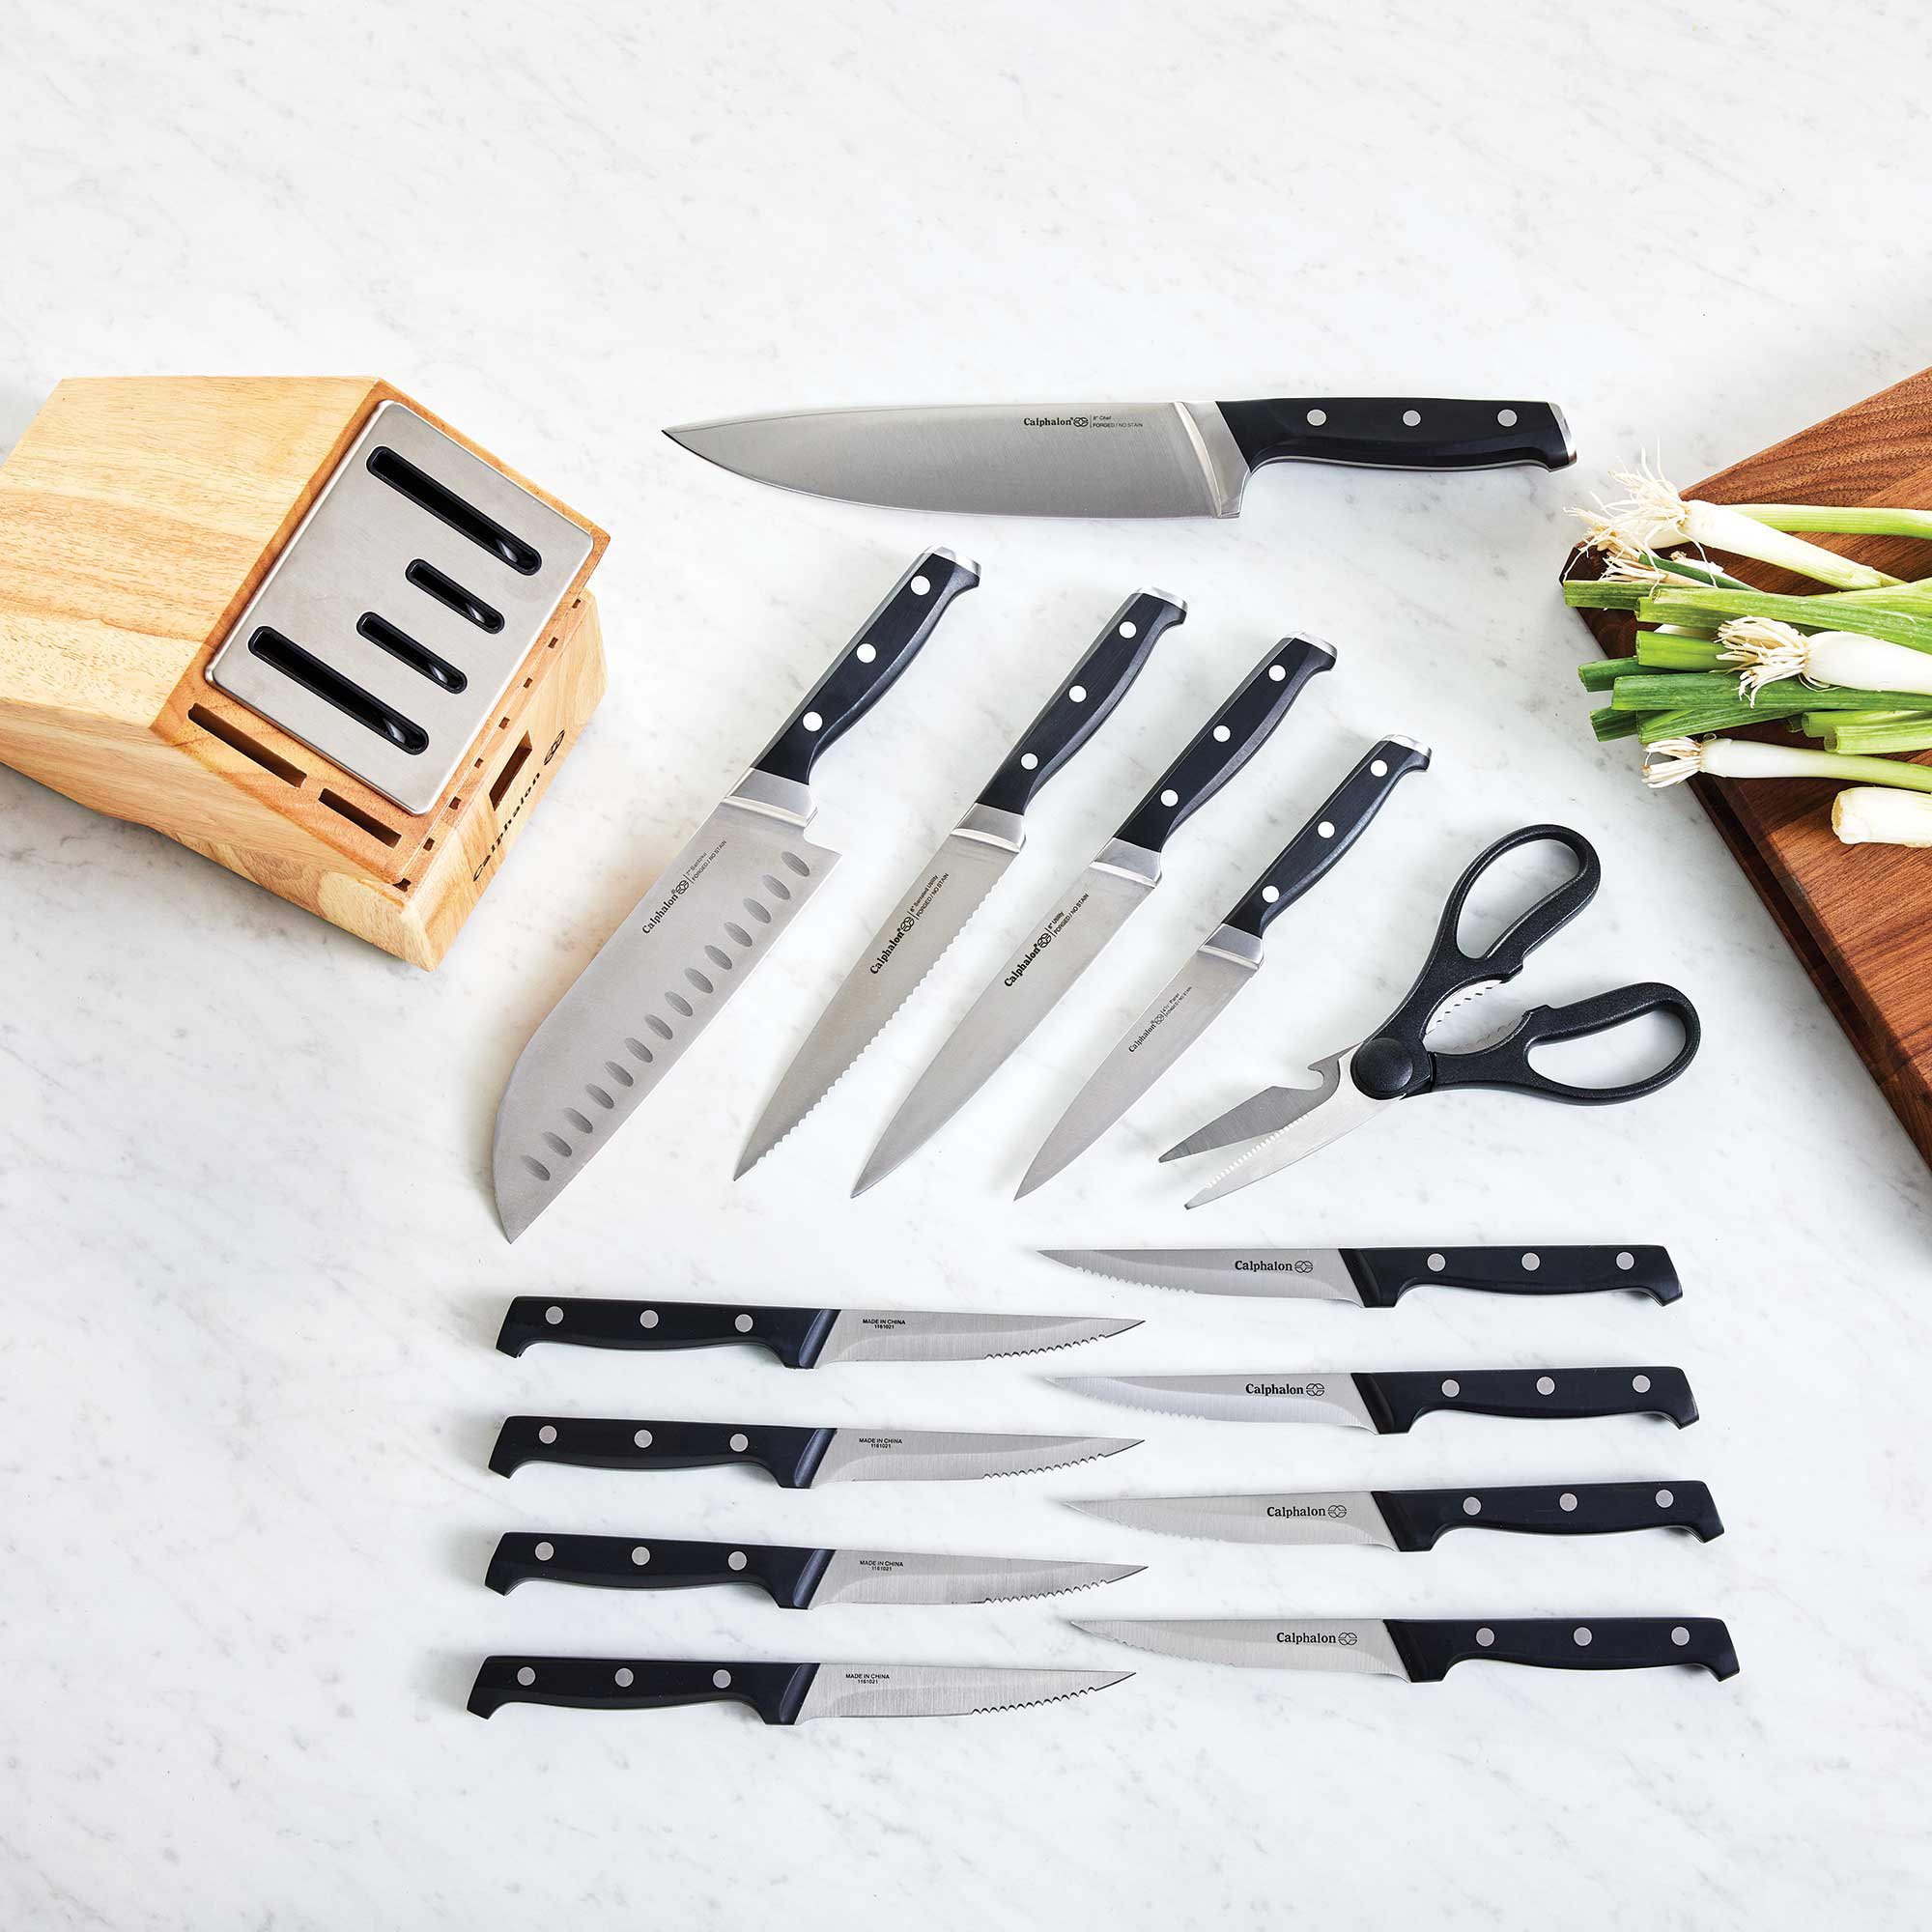 Microban and Calphalon Knife Sets with Integrated Antimicrobial Properties